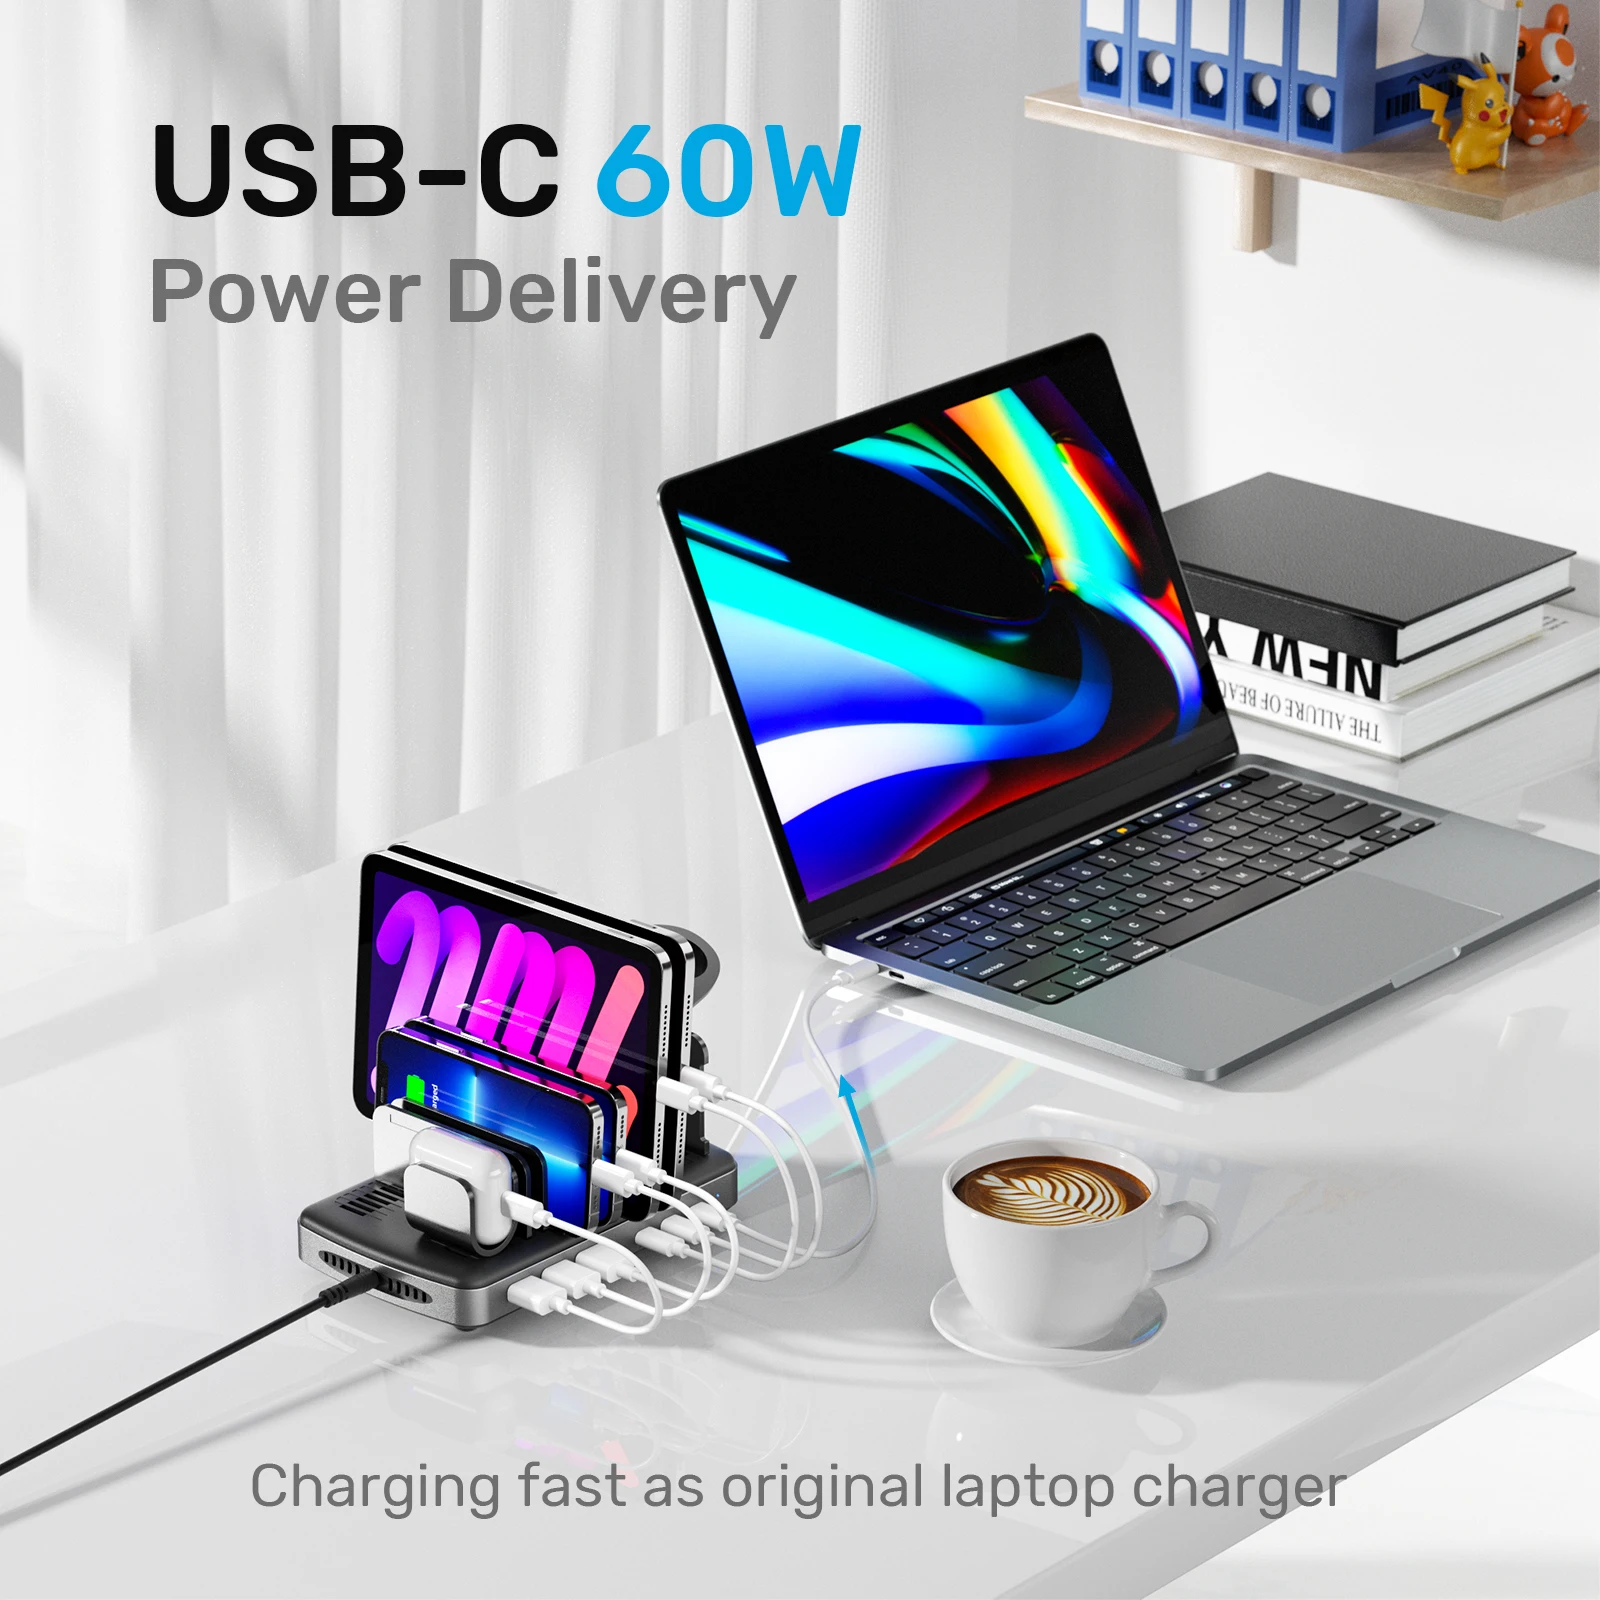 Unitek USB C Charging Station 120W Fast Charging Stand with Type-C PD 60W 6  Ports Charging Dock for iPhone iPad Airpods MacBook